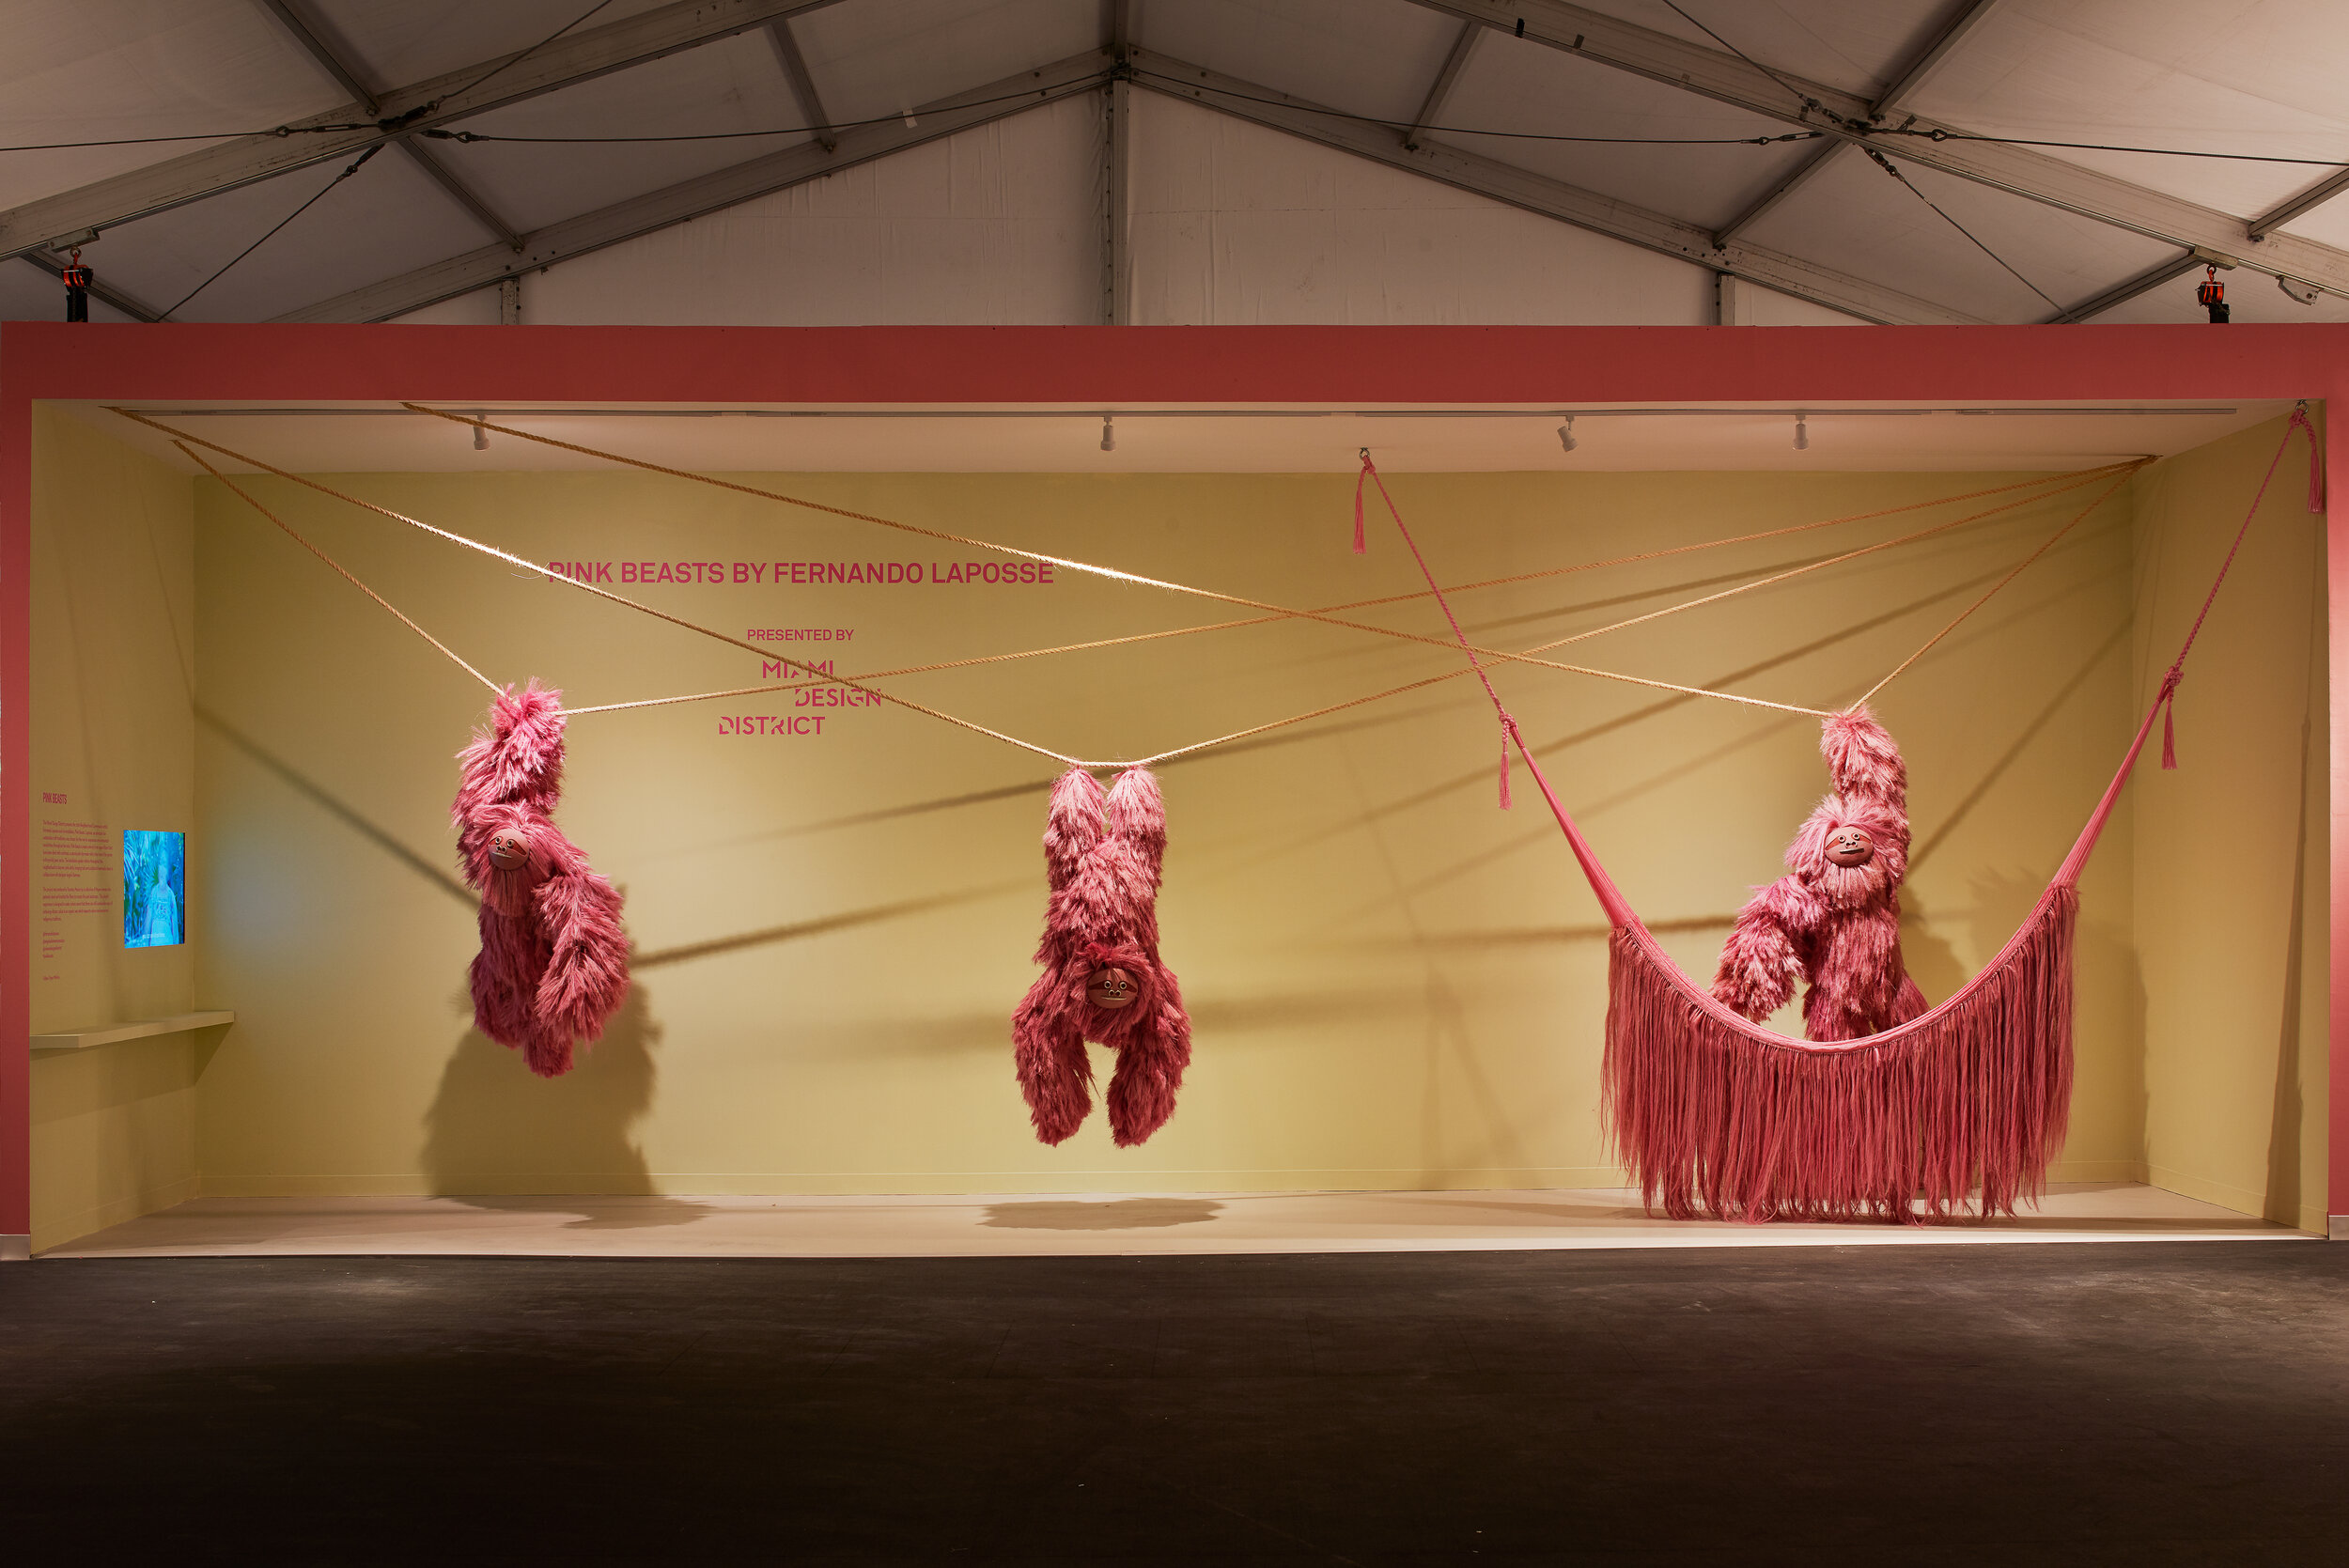 Miami Design District presents Pink Beasts by Fernando Laposse 